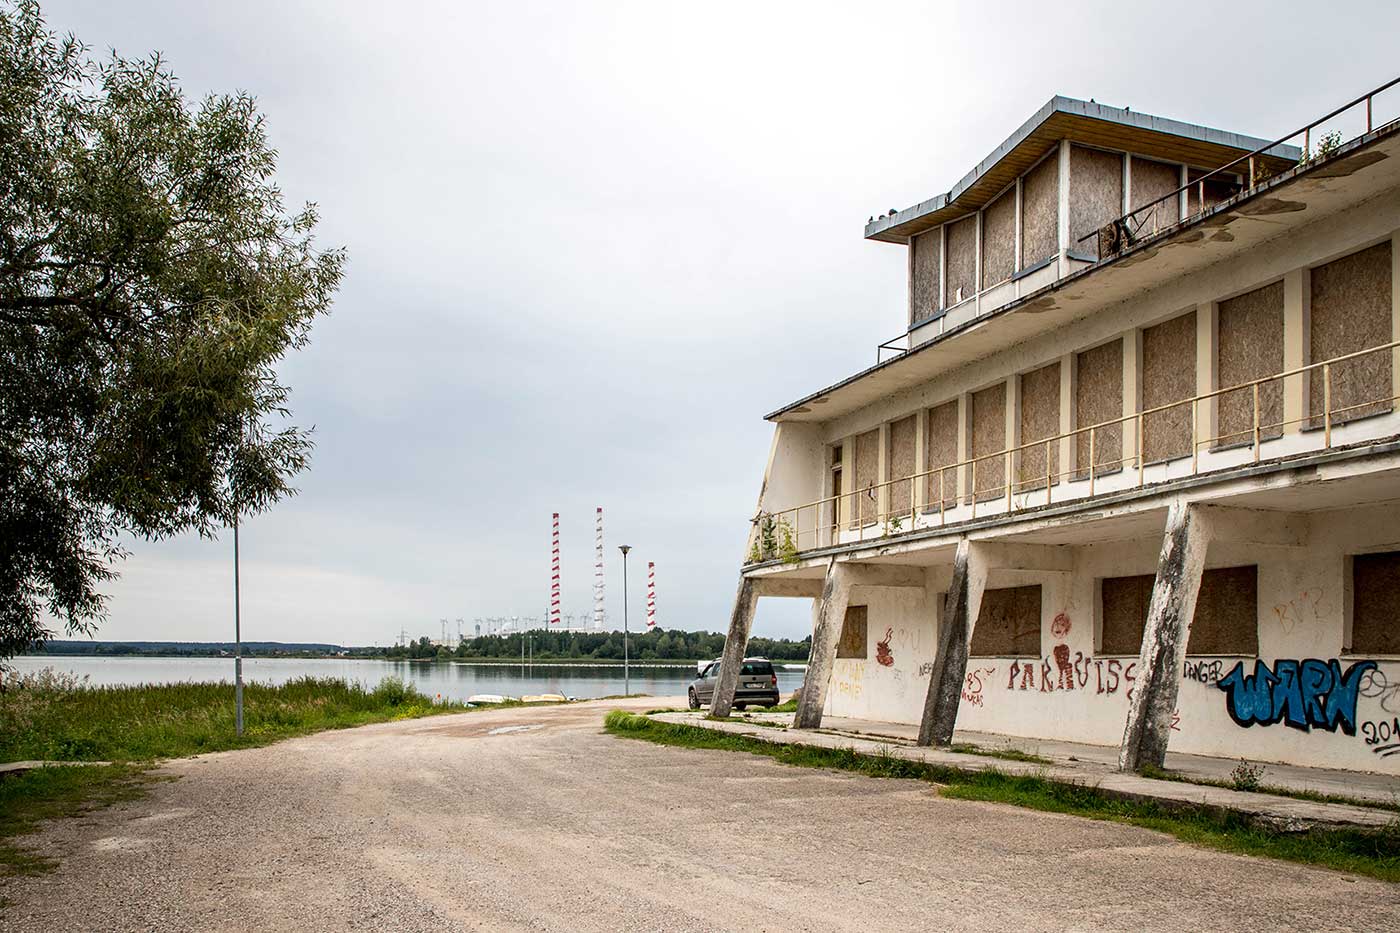 Beyond this building lies Elektrėnai Beach – where in summer, citizens can swim in the cooling reservoir, overlooked by the power plant's chimneys. Elektrėnai, Lithuania.